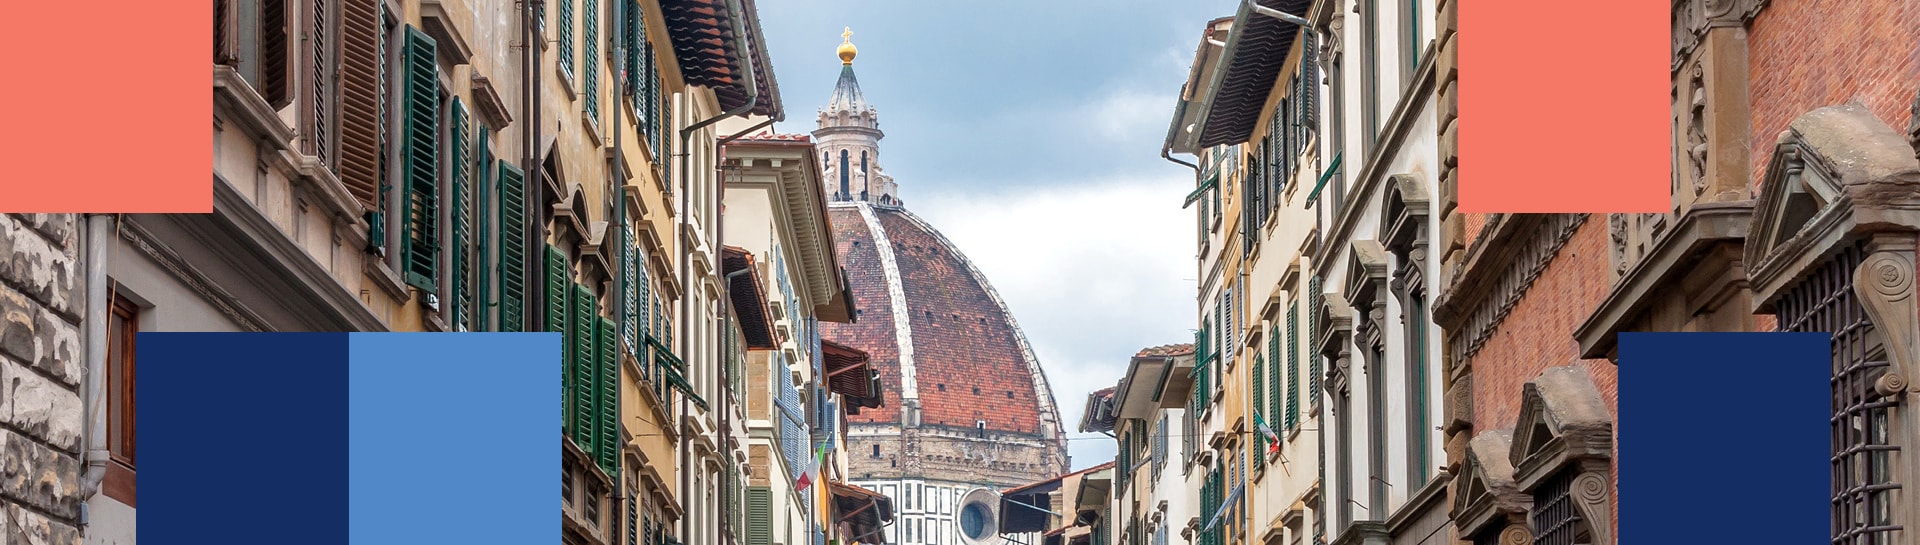 Brunelleschi's Dome view from a Florence street